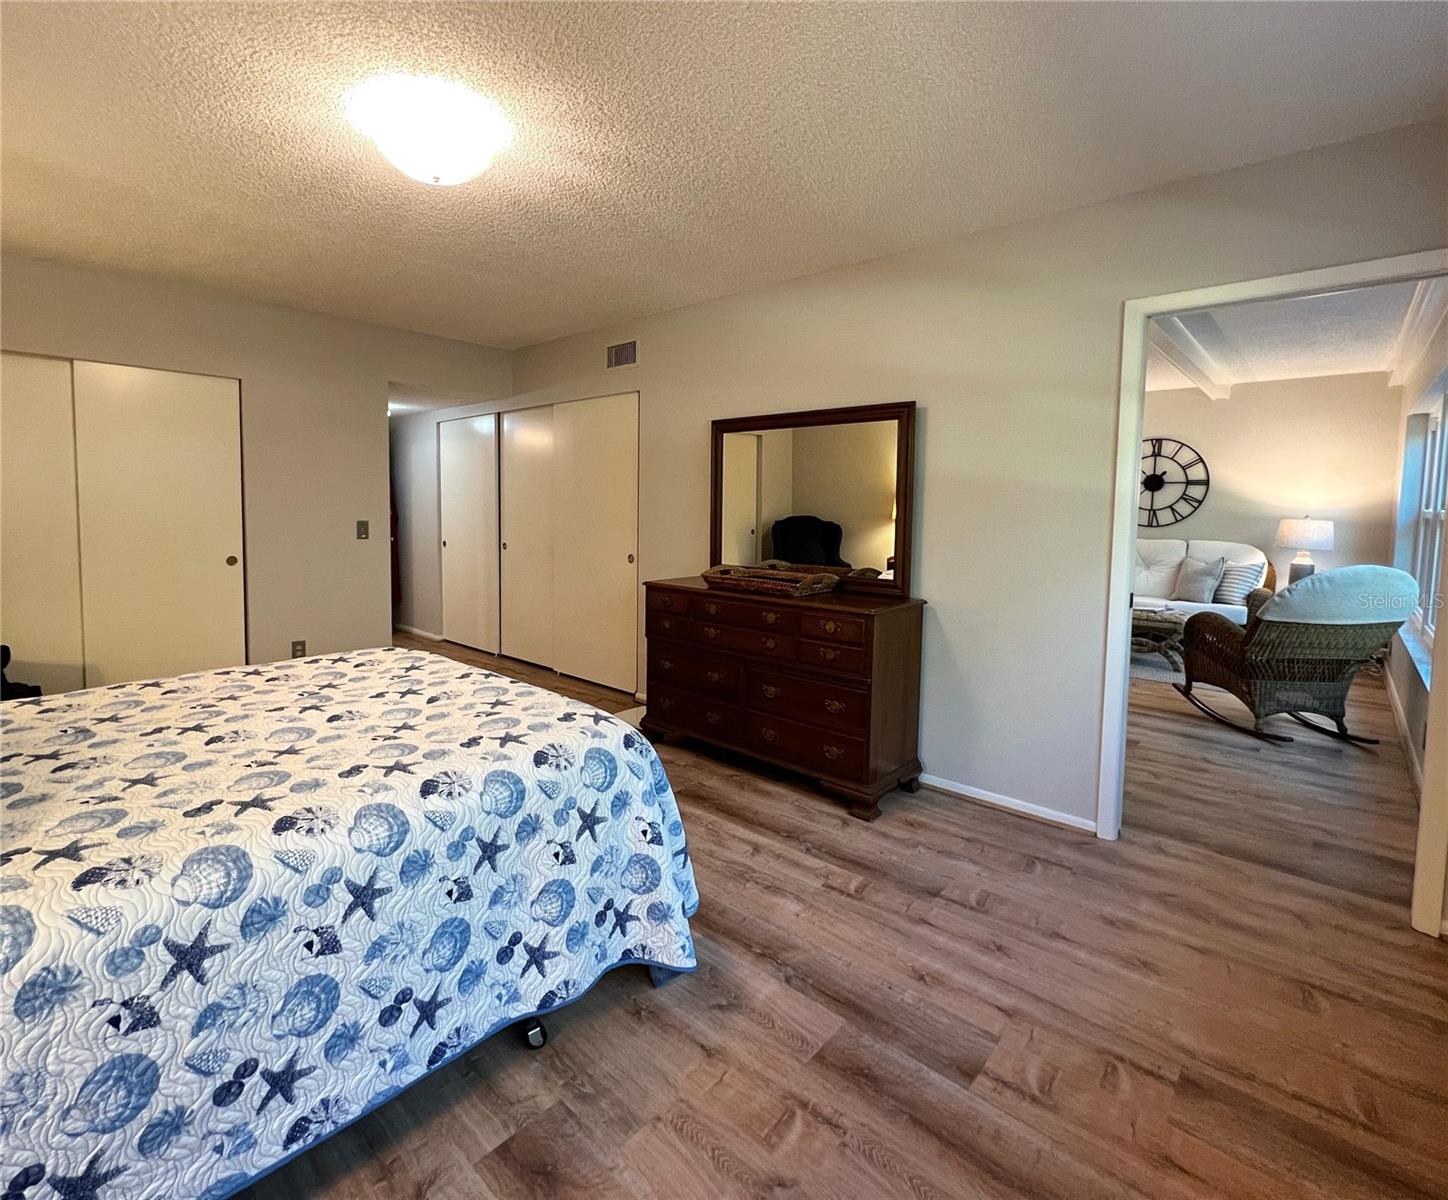 View of the master bedroom, it's two large closets, and the direct access to the family room.